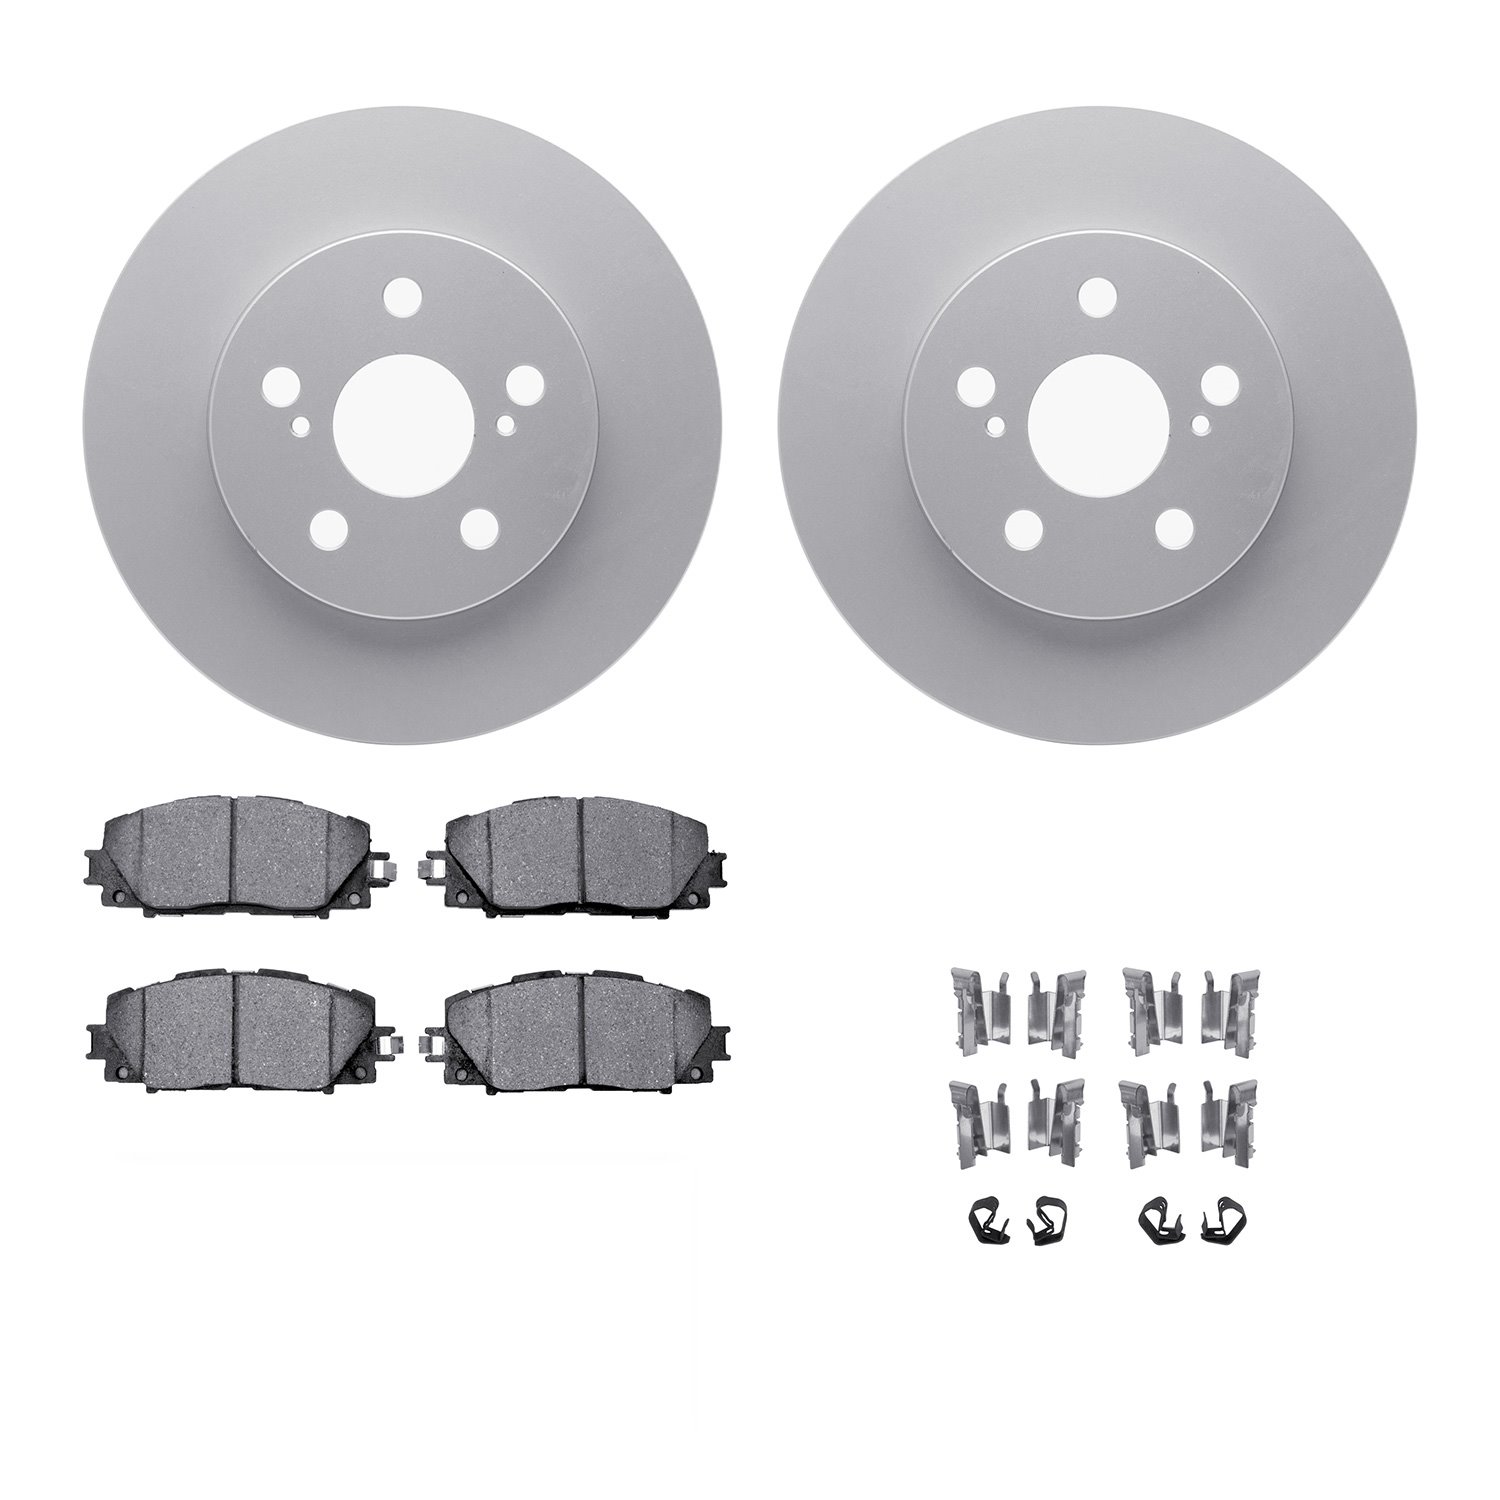 4312-76066 Geospec Brake Rotors with 3000-Series Ceramic Brake Pads & Hardware, Fits Select Lexus/Toyota/Scion, Position: Front